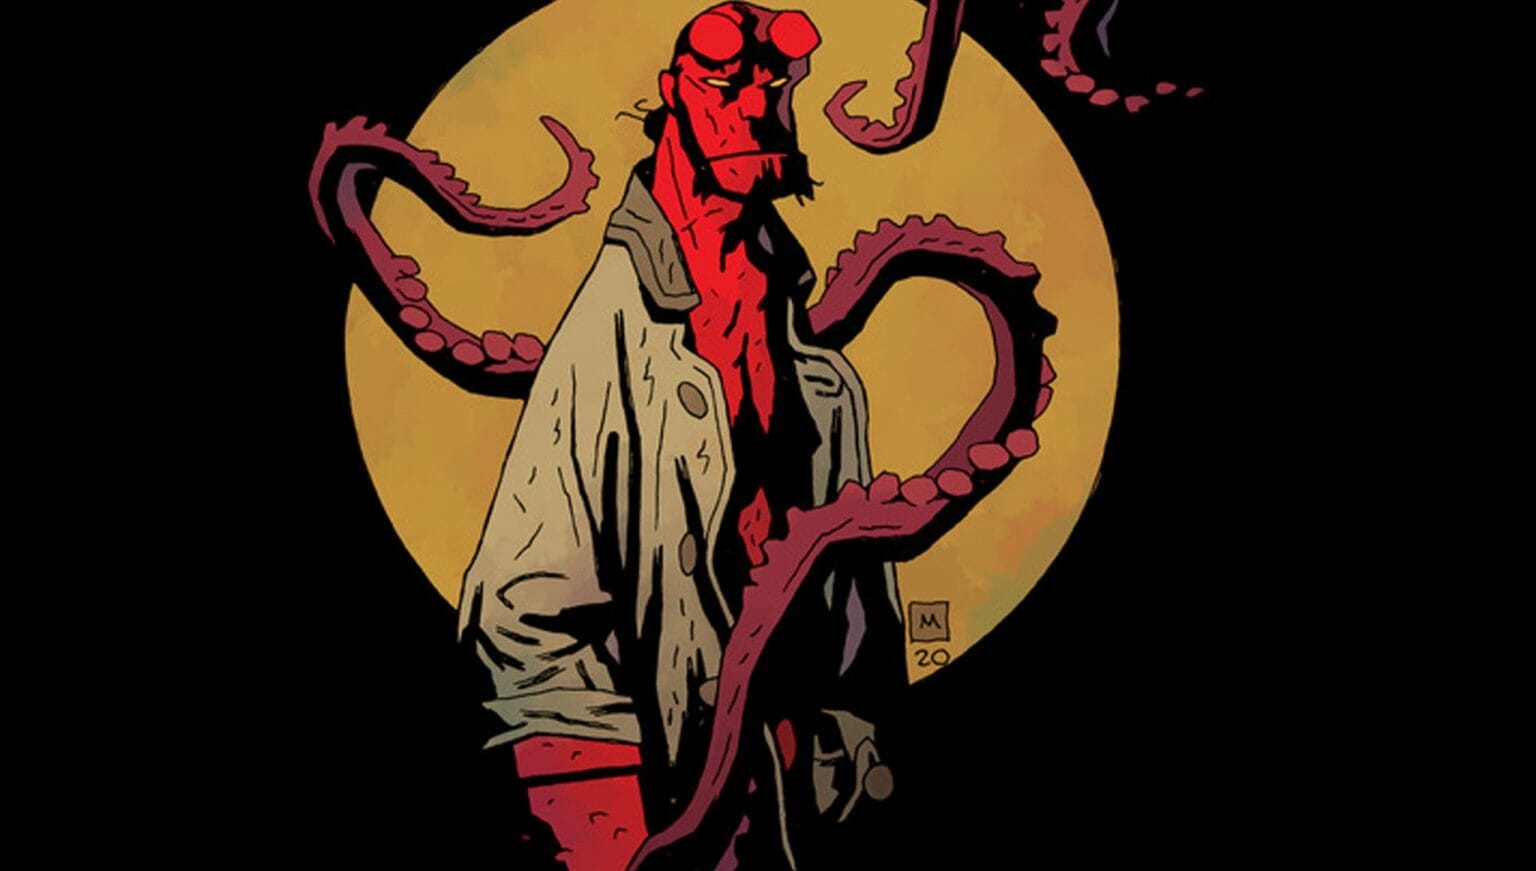 Hellboy from the Mike Mignola comics books is coming back to the big screen with another film reboot starting production in 2023.